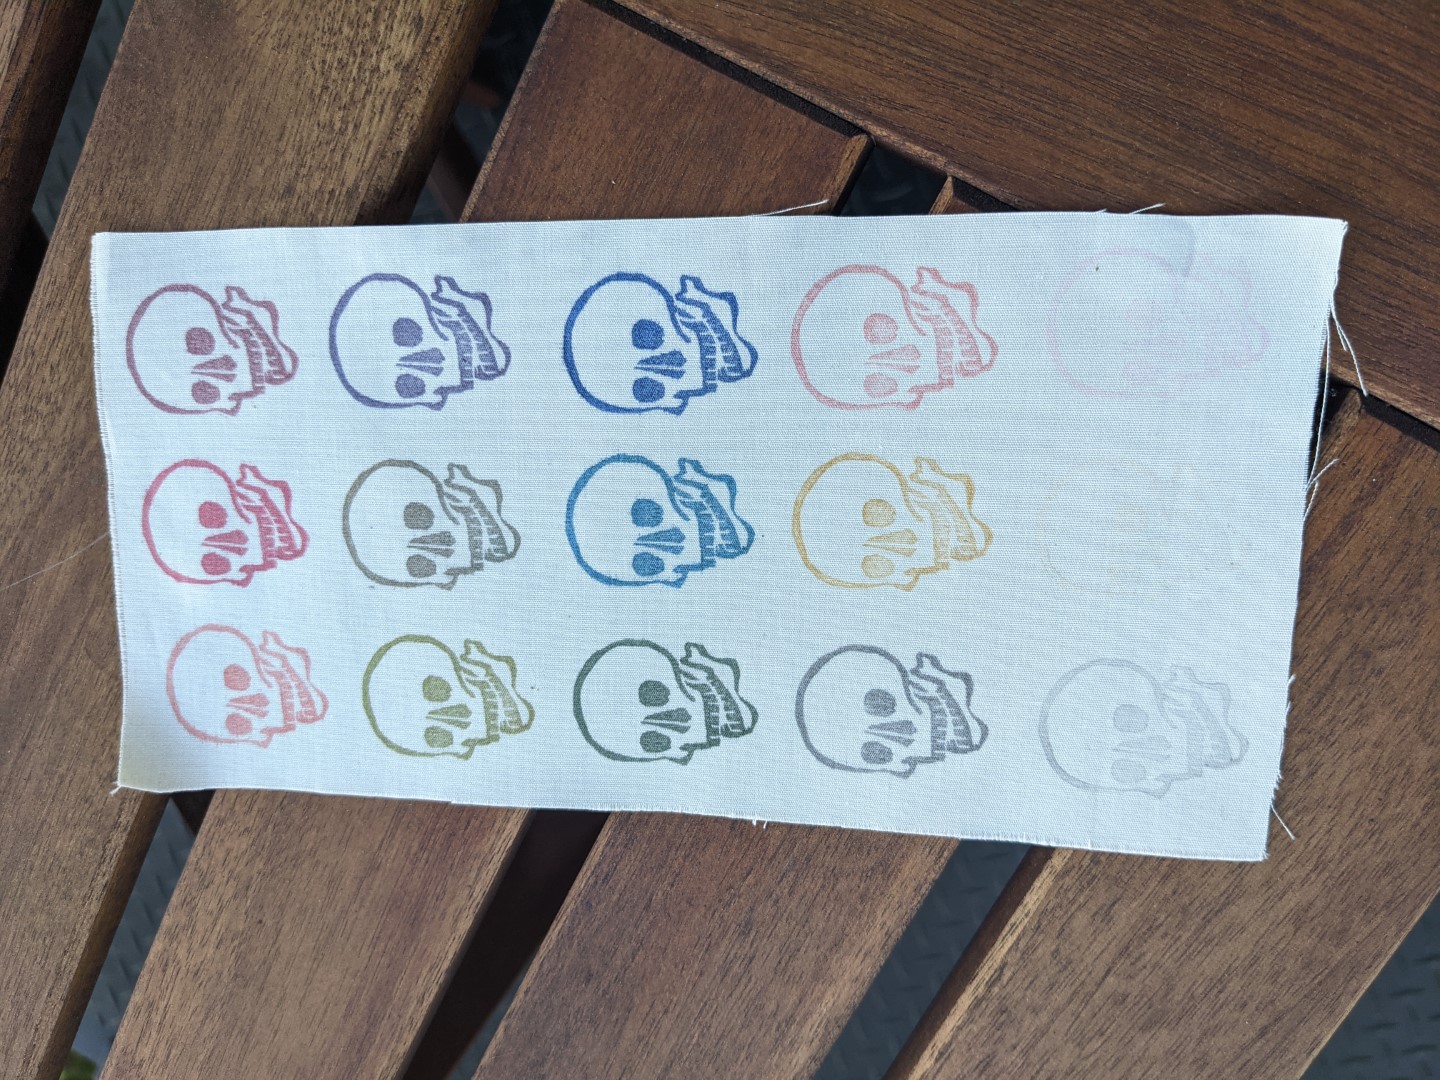 A piece of fabric stamped with skulls in varying colors